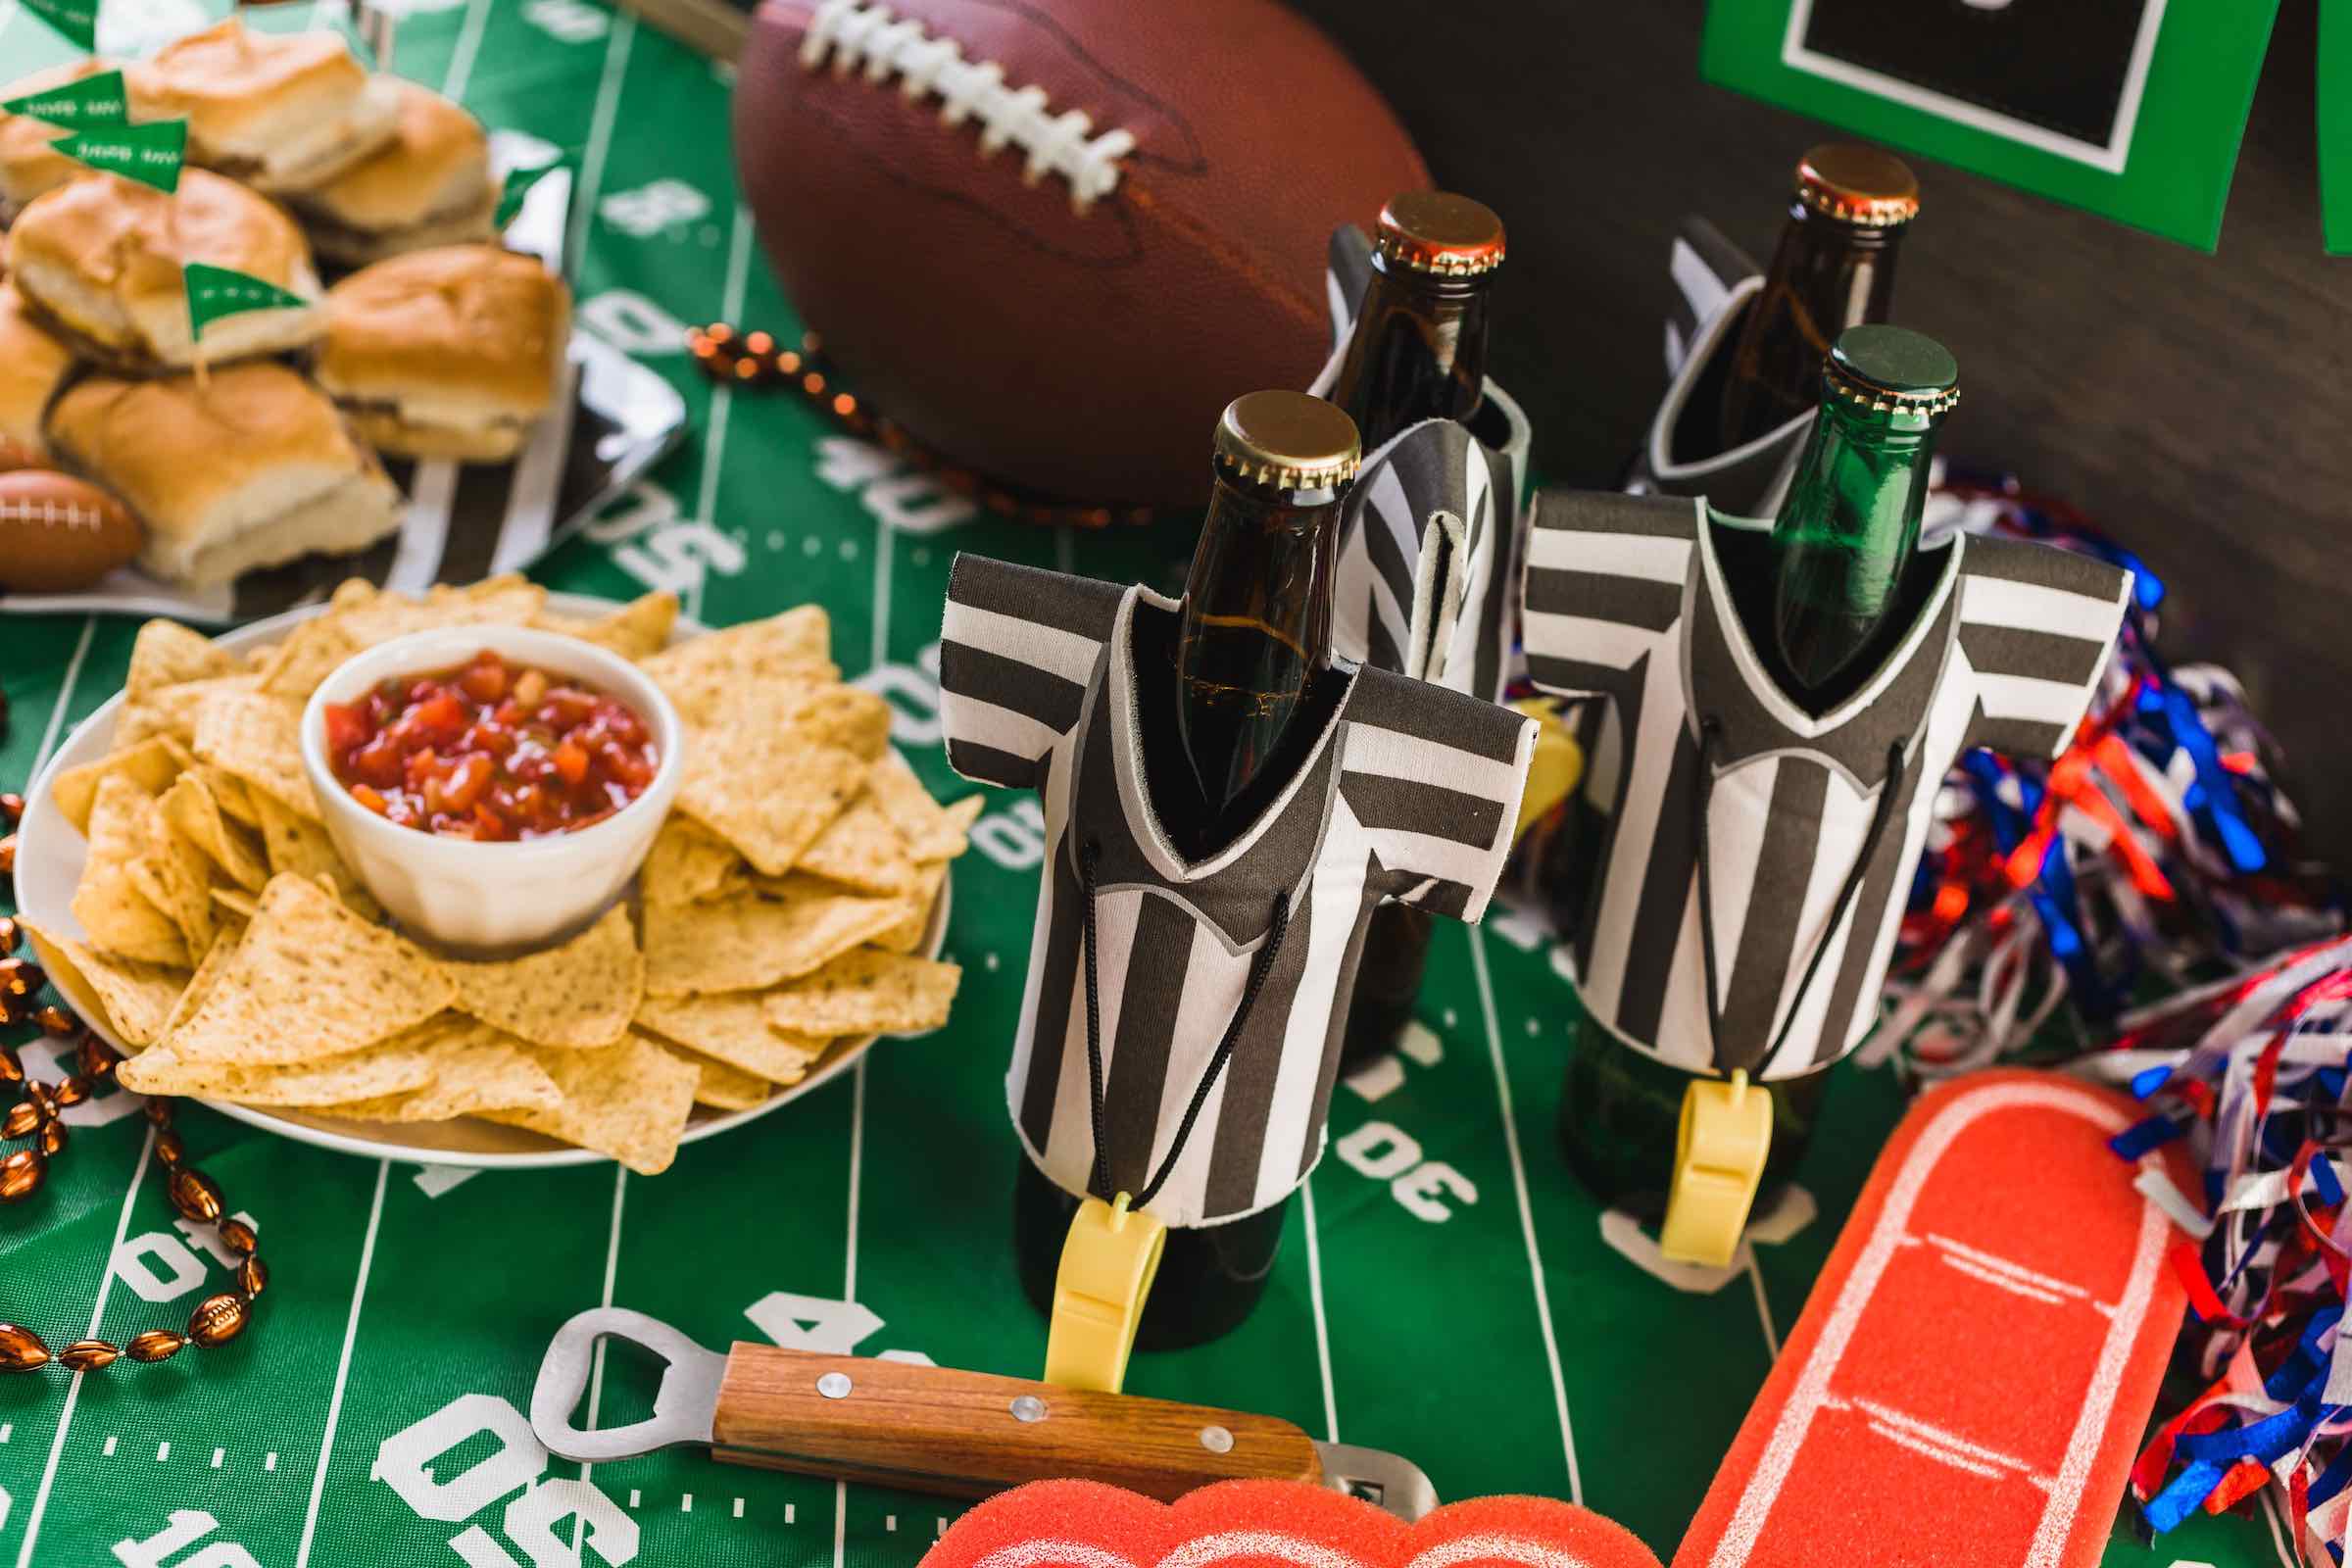 Superbowl showdown: Celebrate with these fun party food ideas